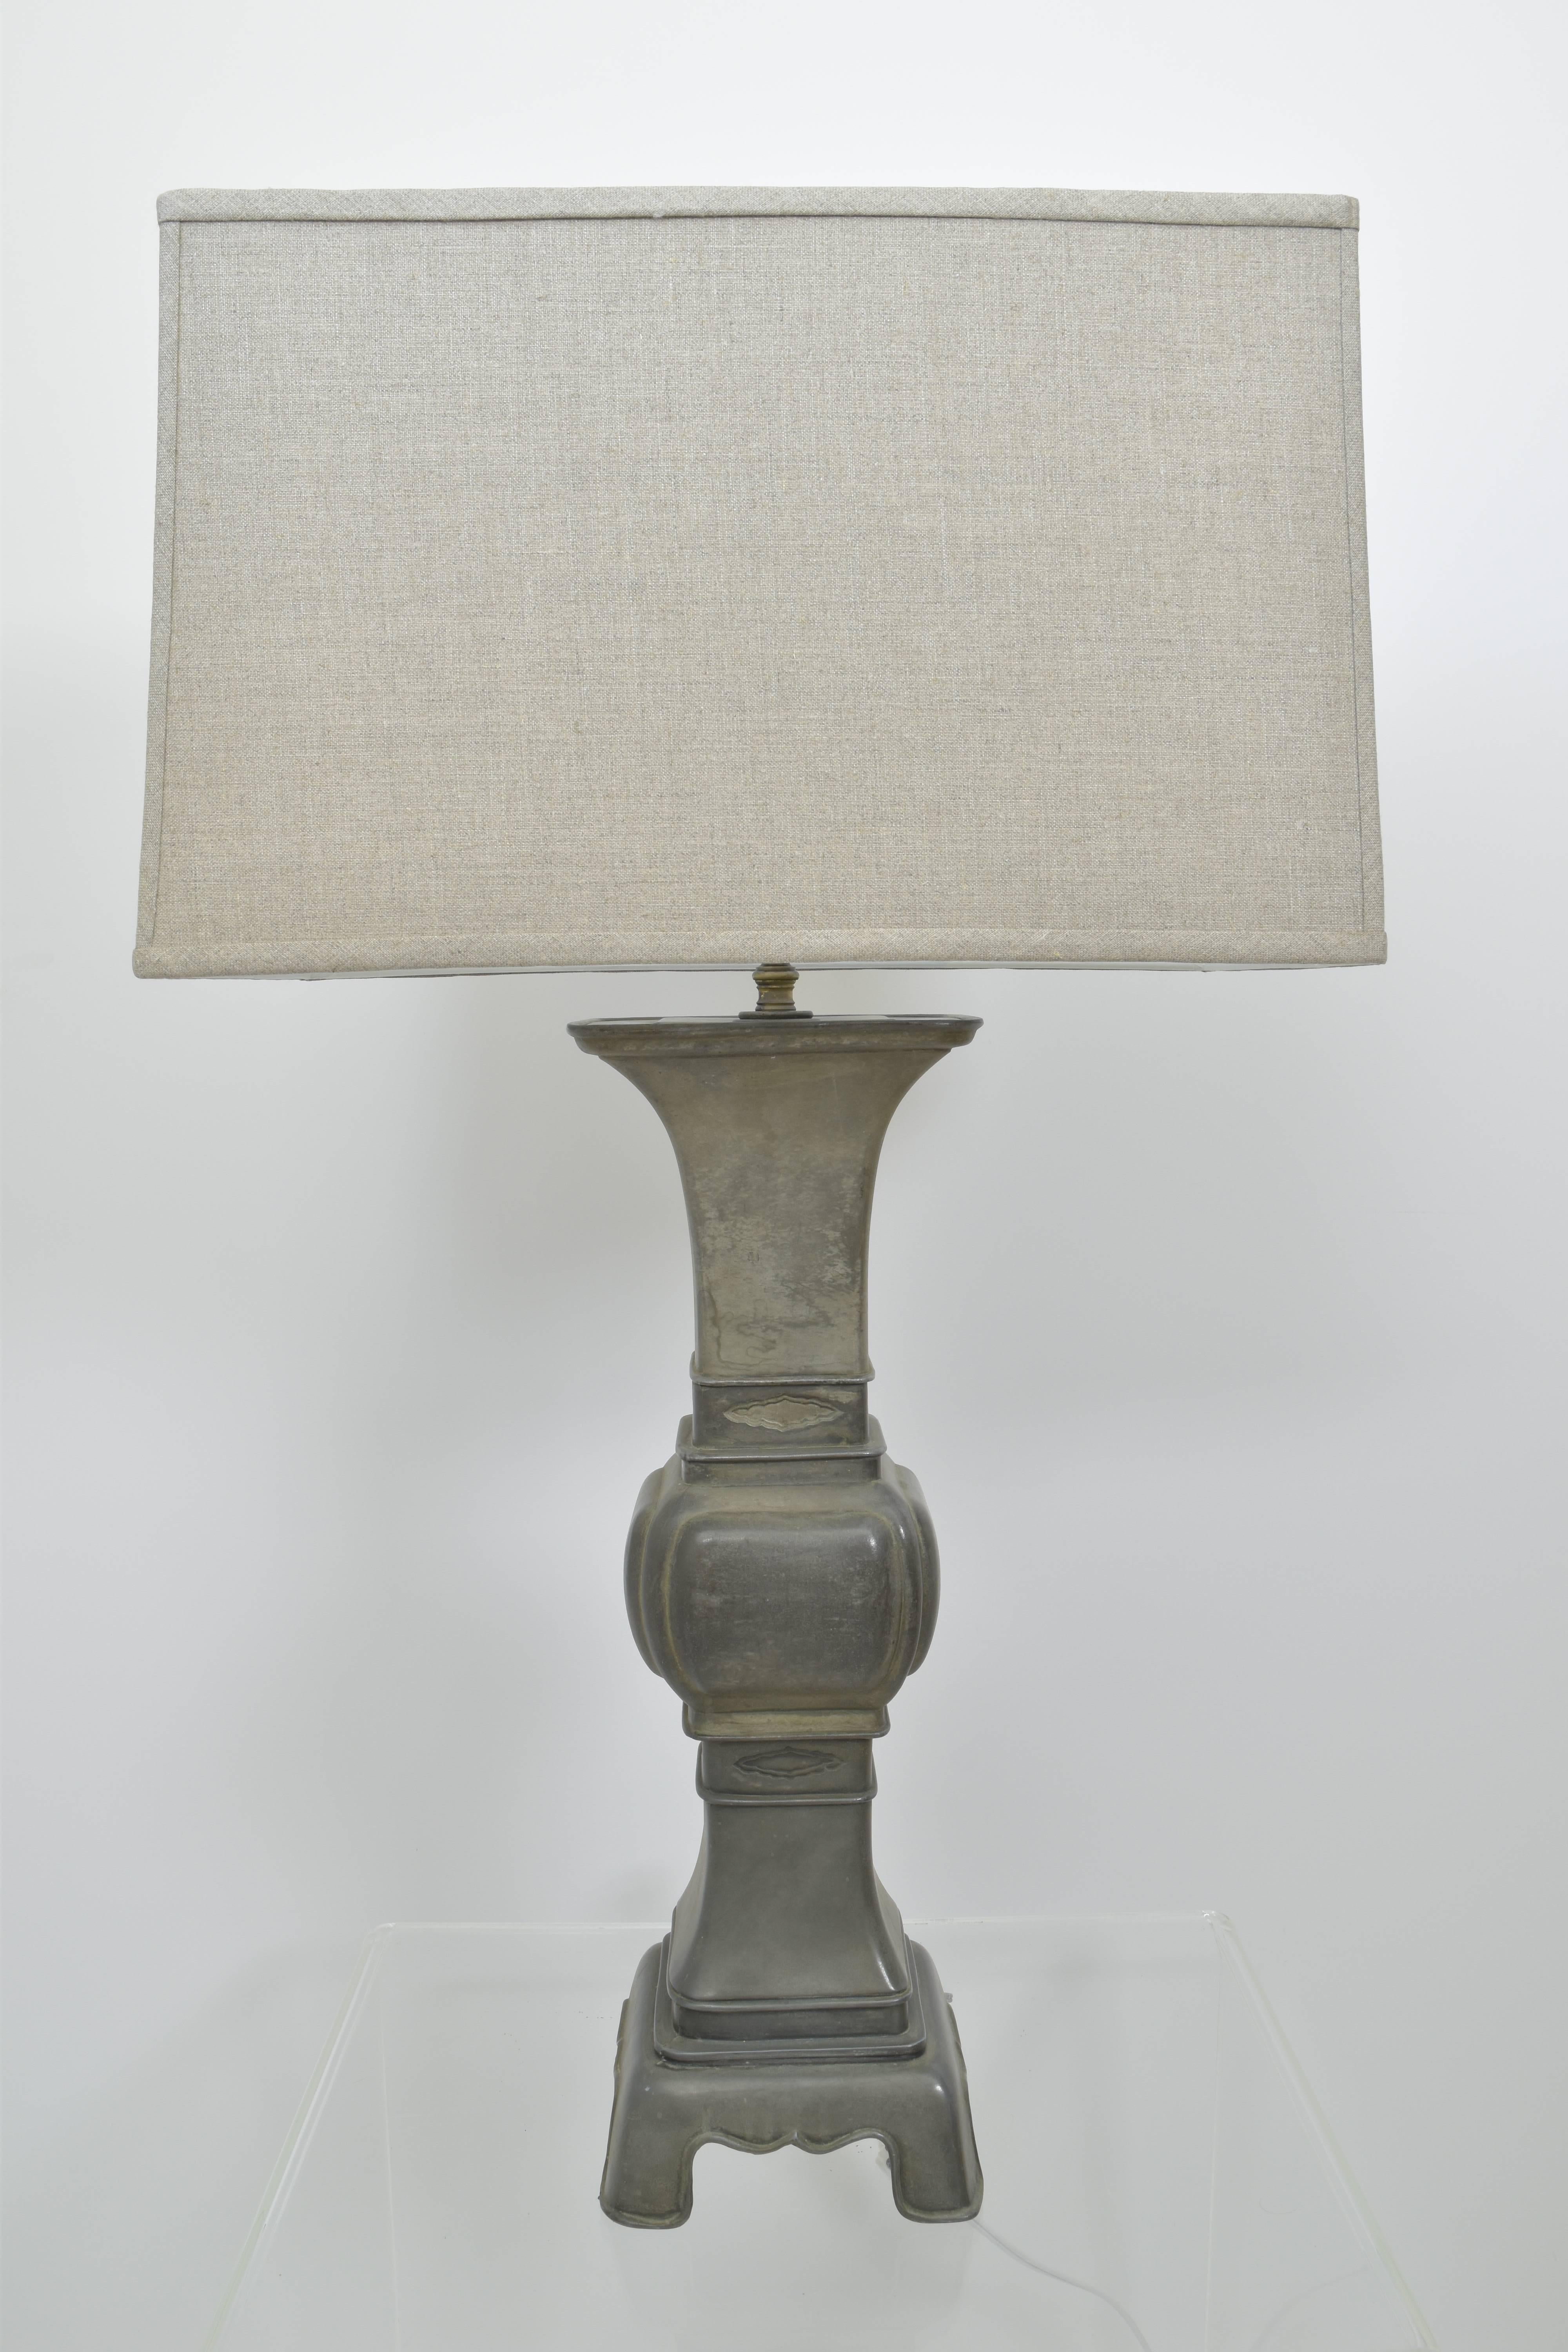 Tall Chinese pewter altar stick as a lamp.  A nicely proportioned lamp with a modern gray linen shade. 

Linen shade measures:
18